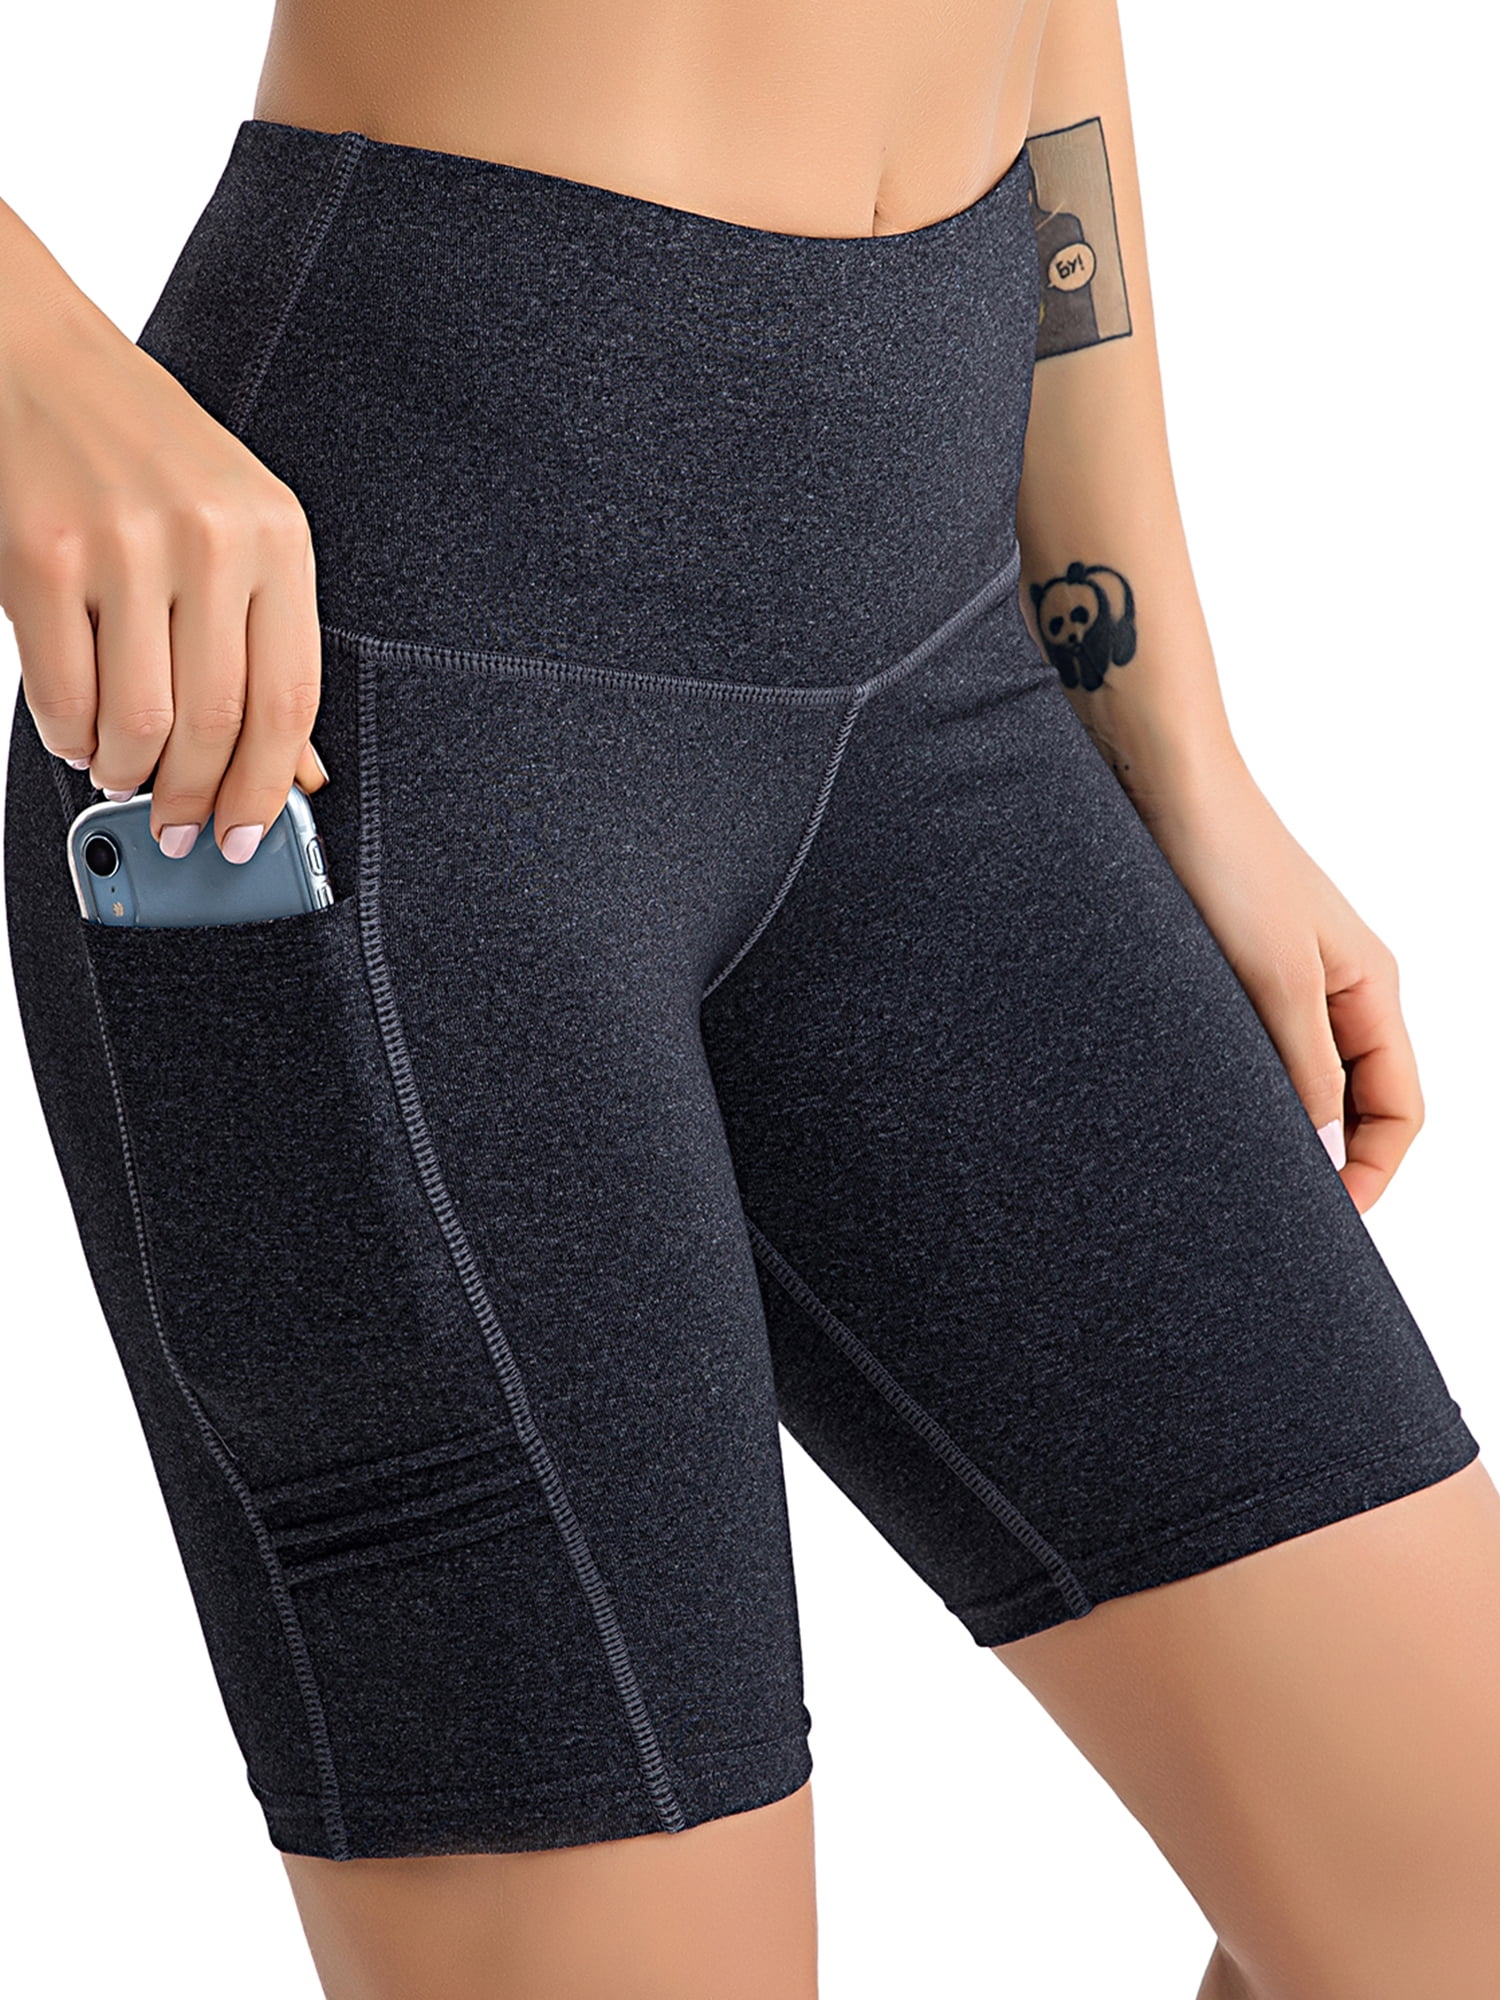 Yoga Shorts for Women Plus Size,Tummy Control High Wasited Workout Running Athletic Biker Shorts Yoga Pants with Pockets 